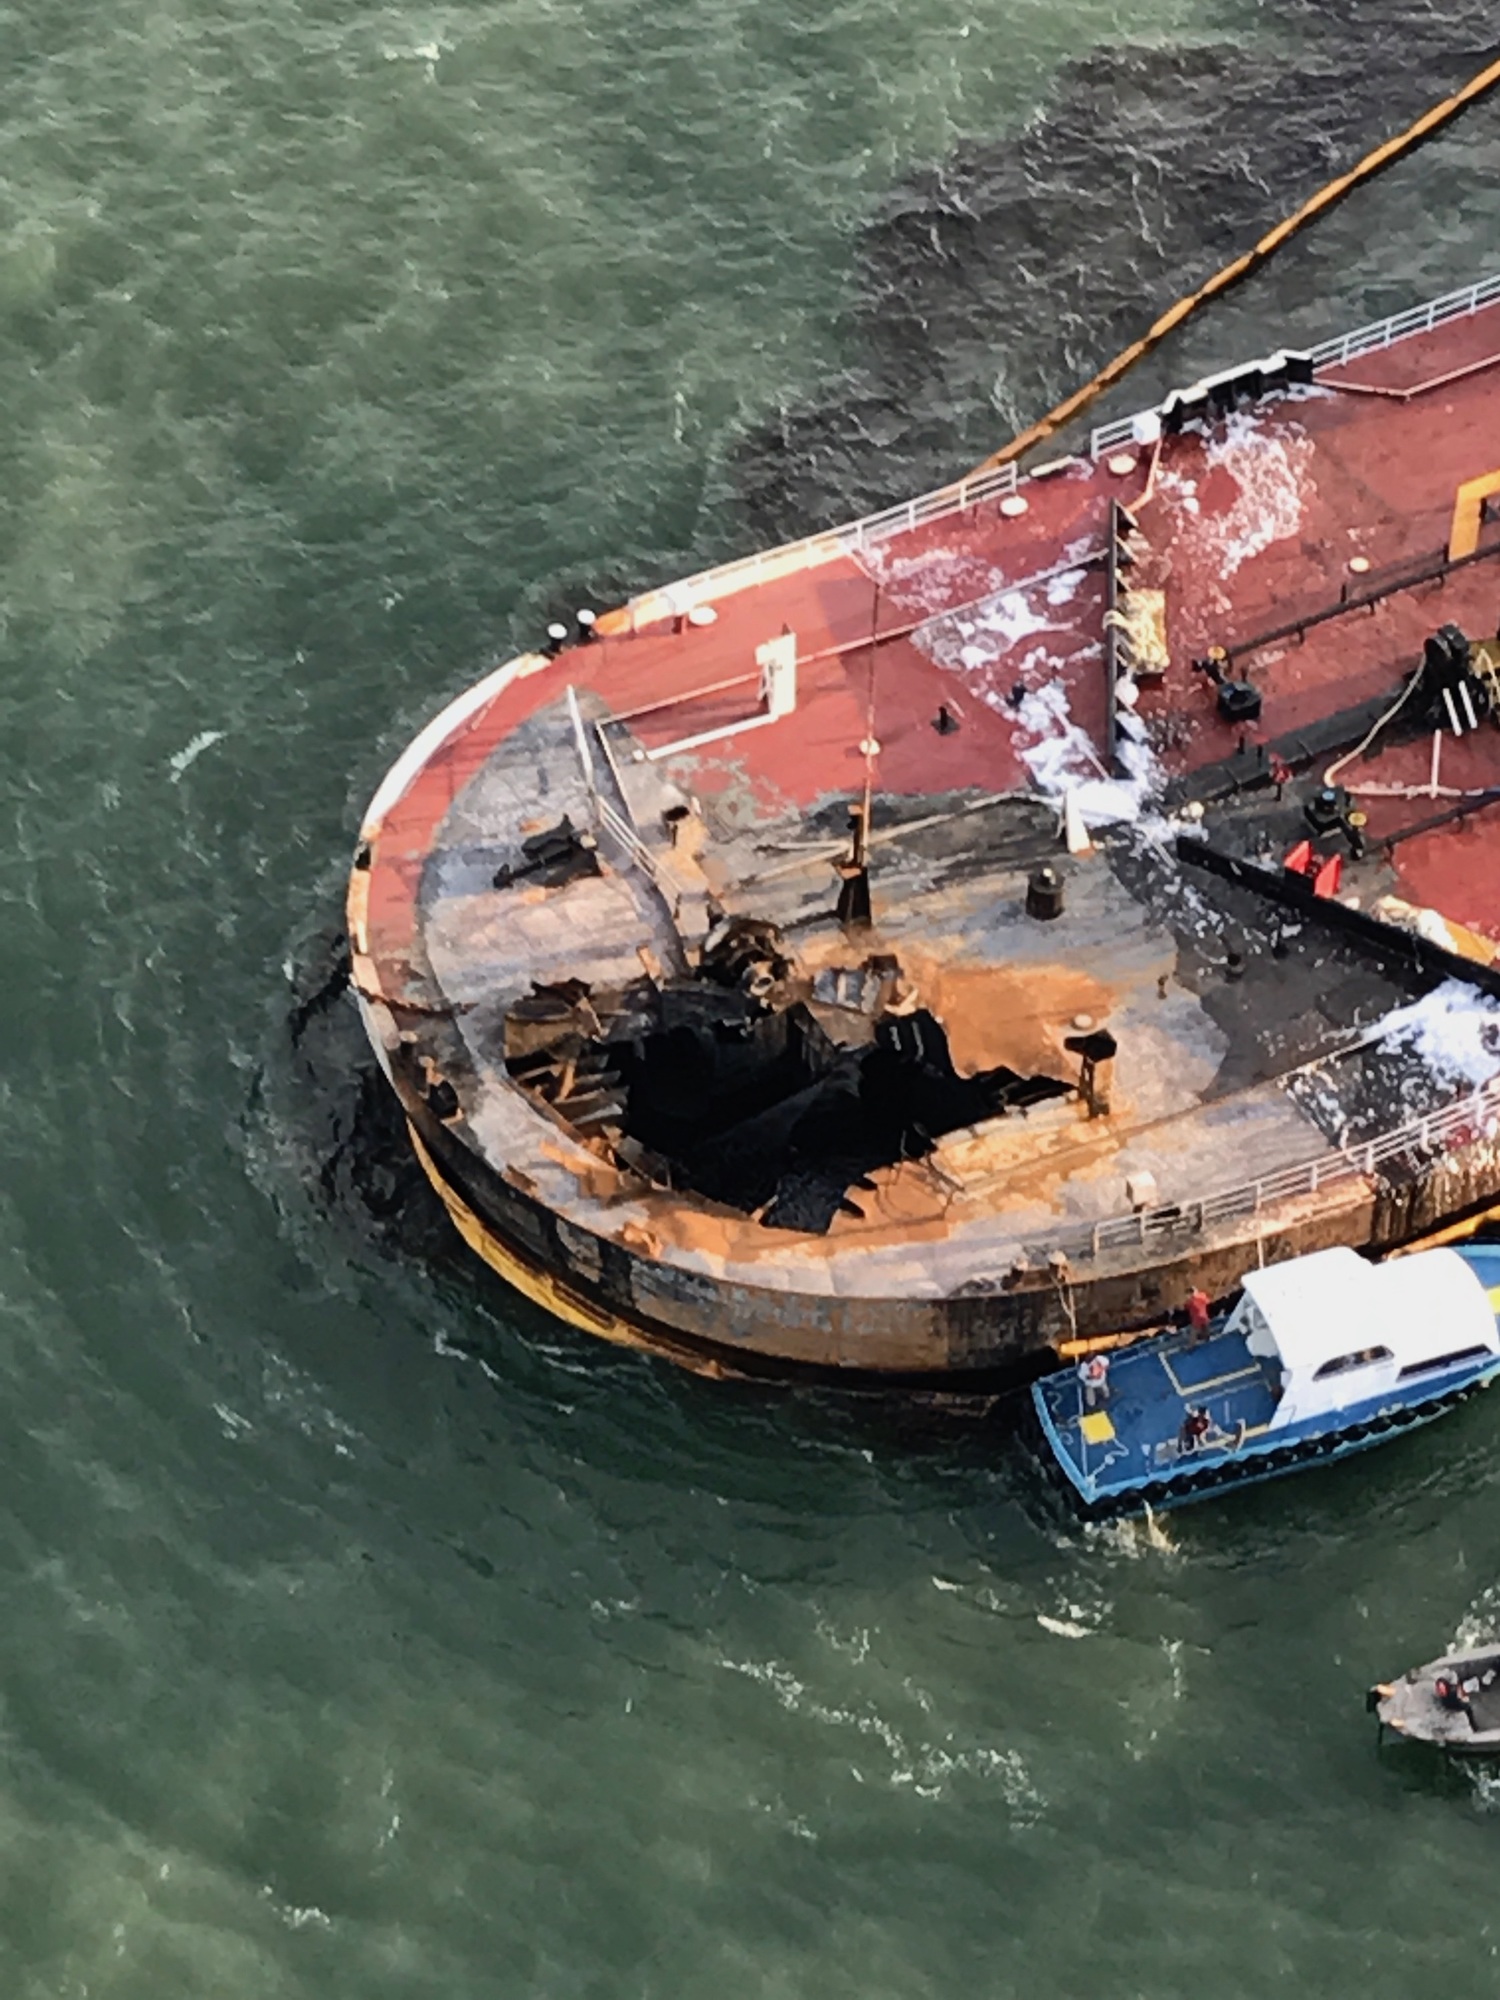 Coast Guard responds to barge fire offshore of Port Aransas, Tx